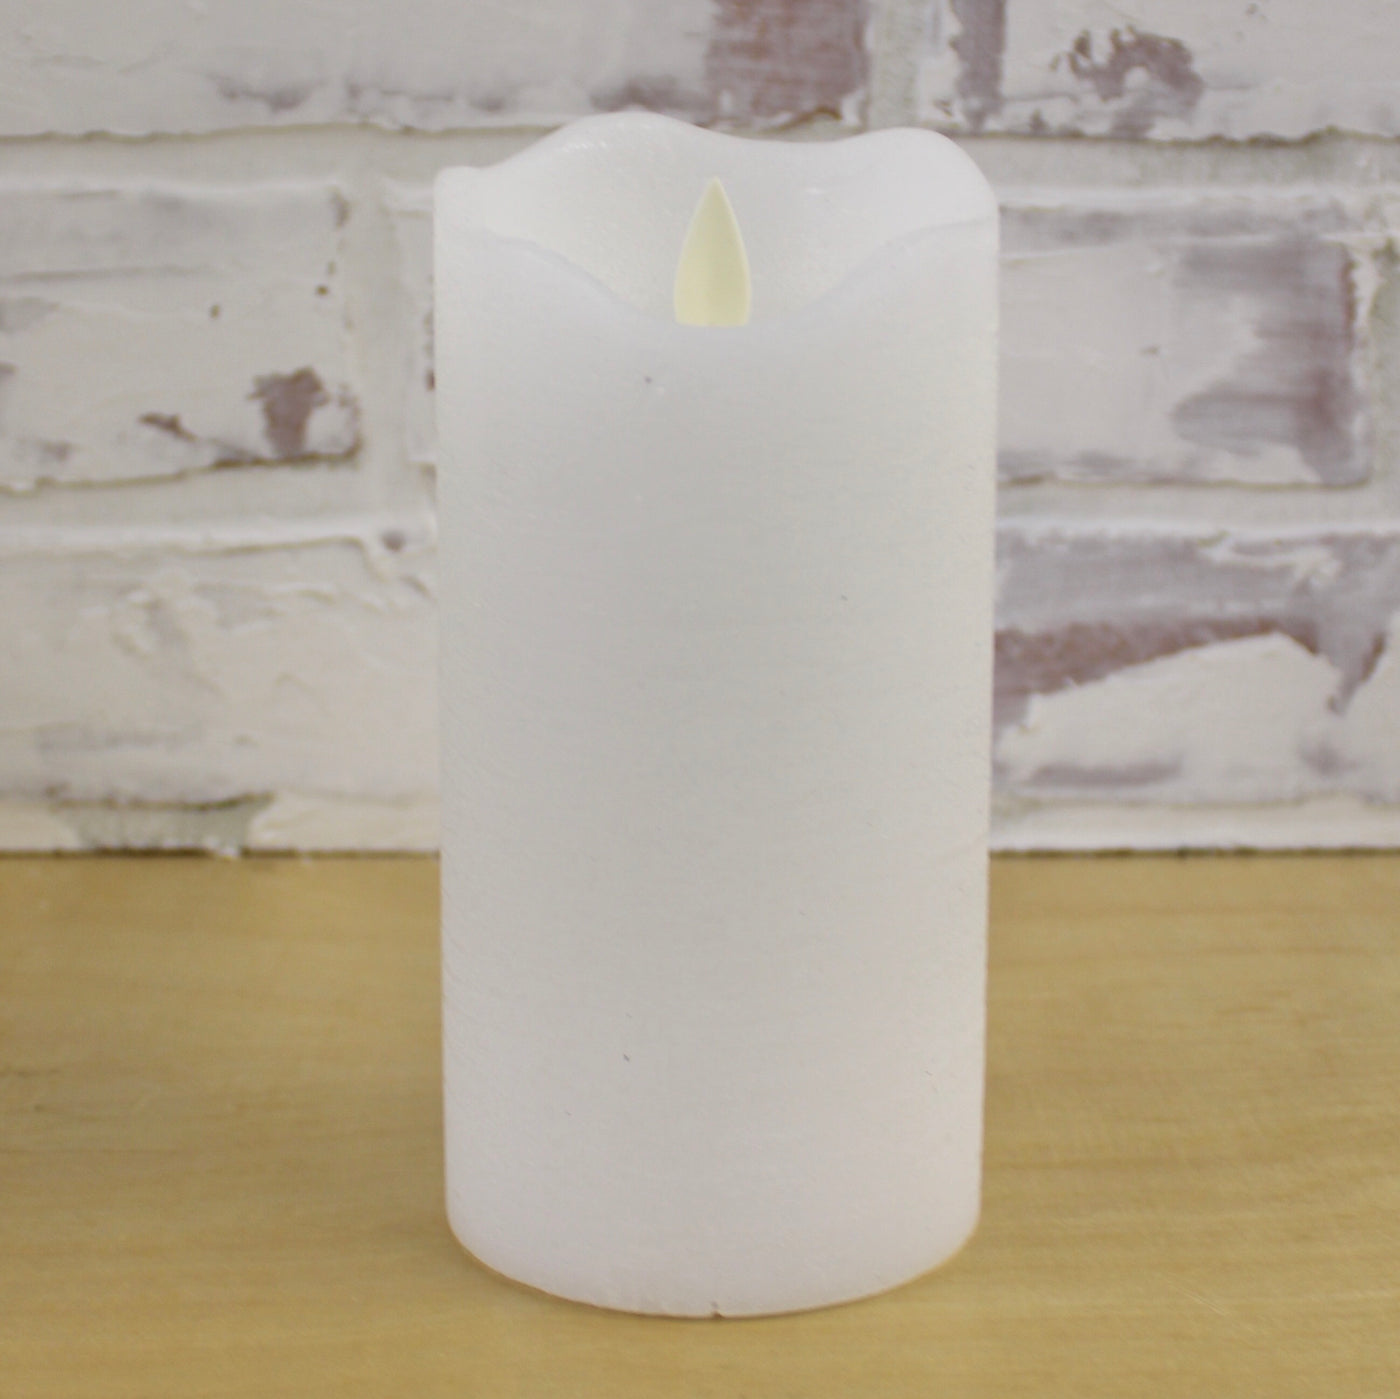 Real Wax Flameless LED Candle